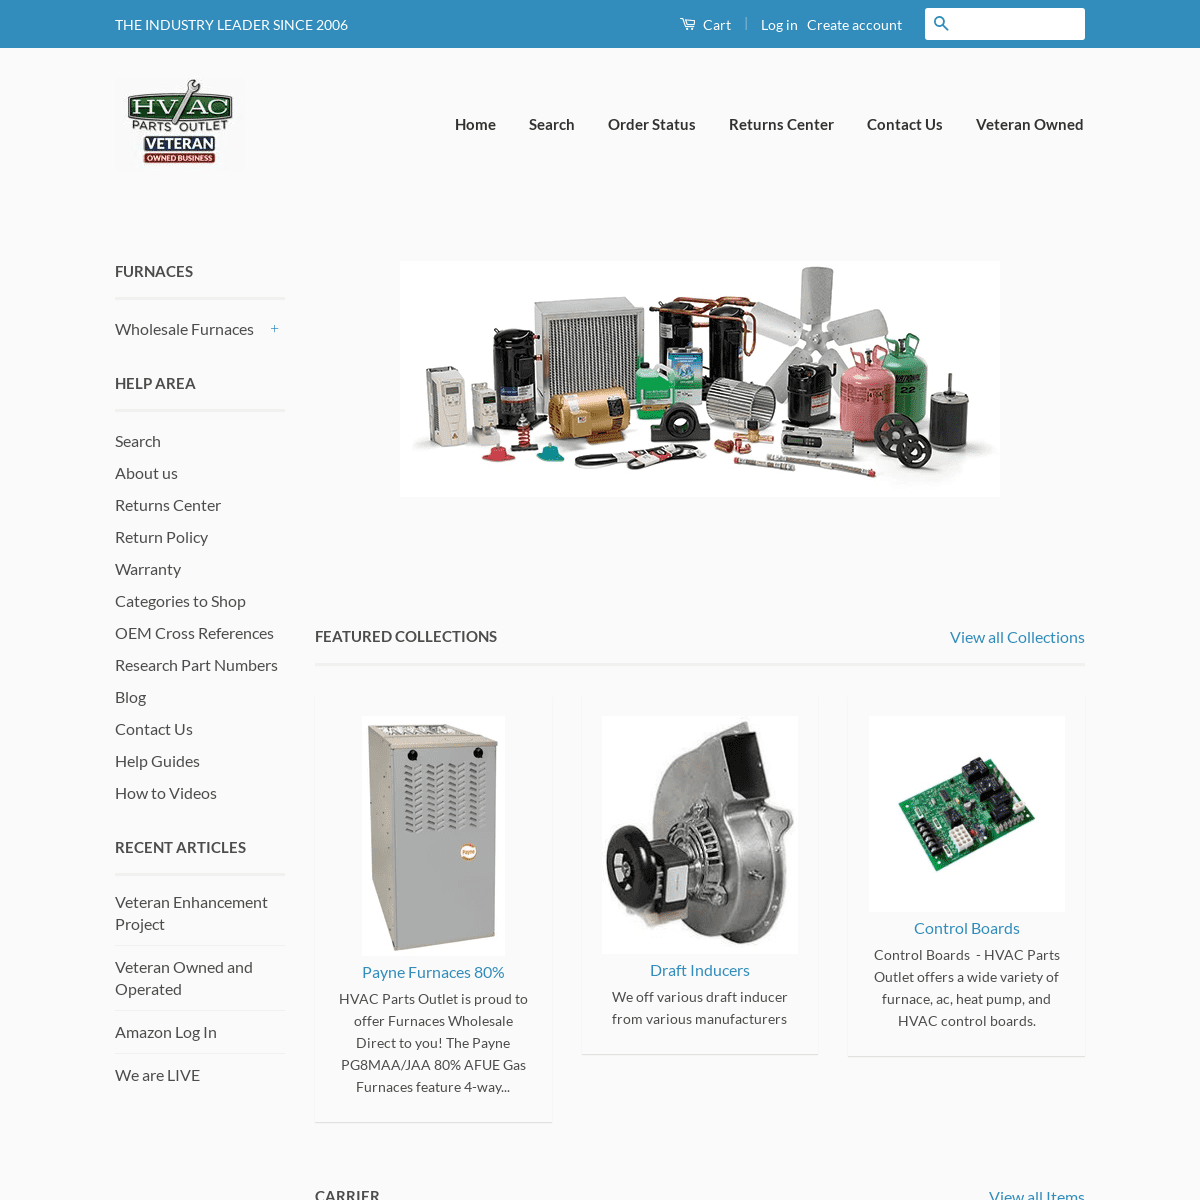 HVAC Parts Outlet: AC, Heating, and HVAC parts and HVAC supplies